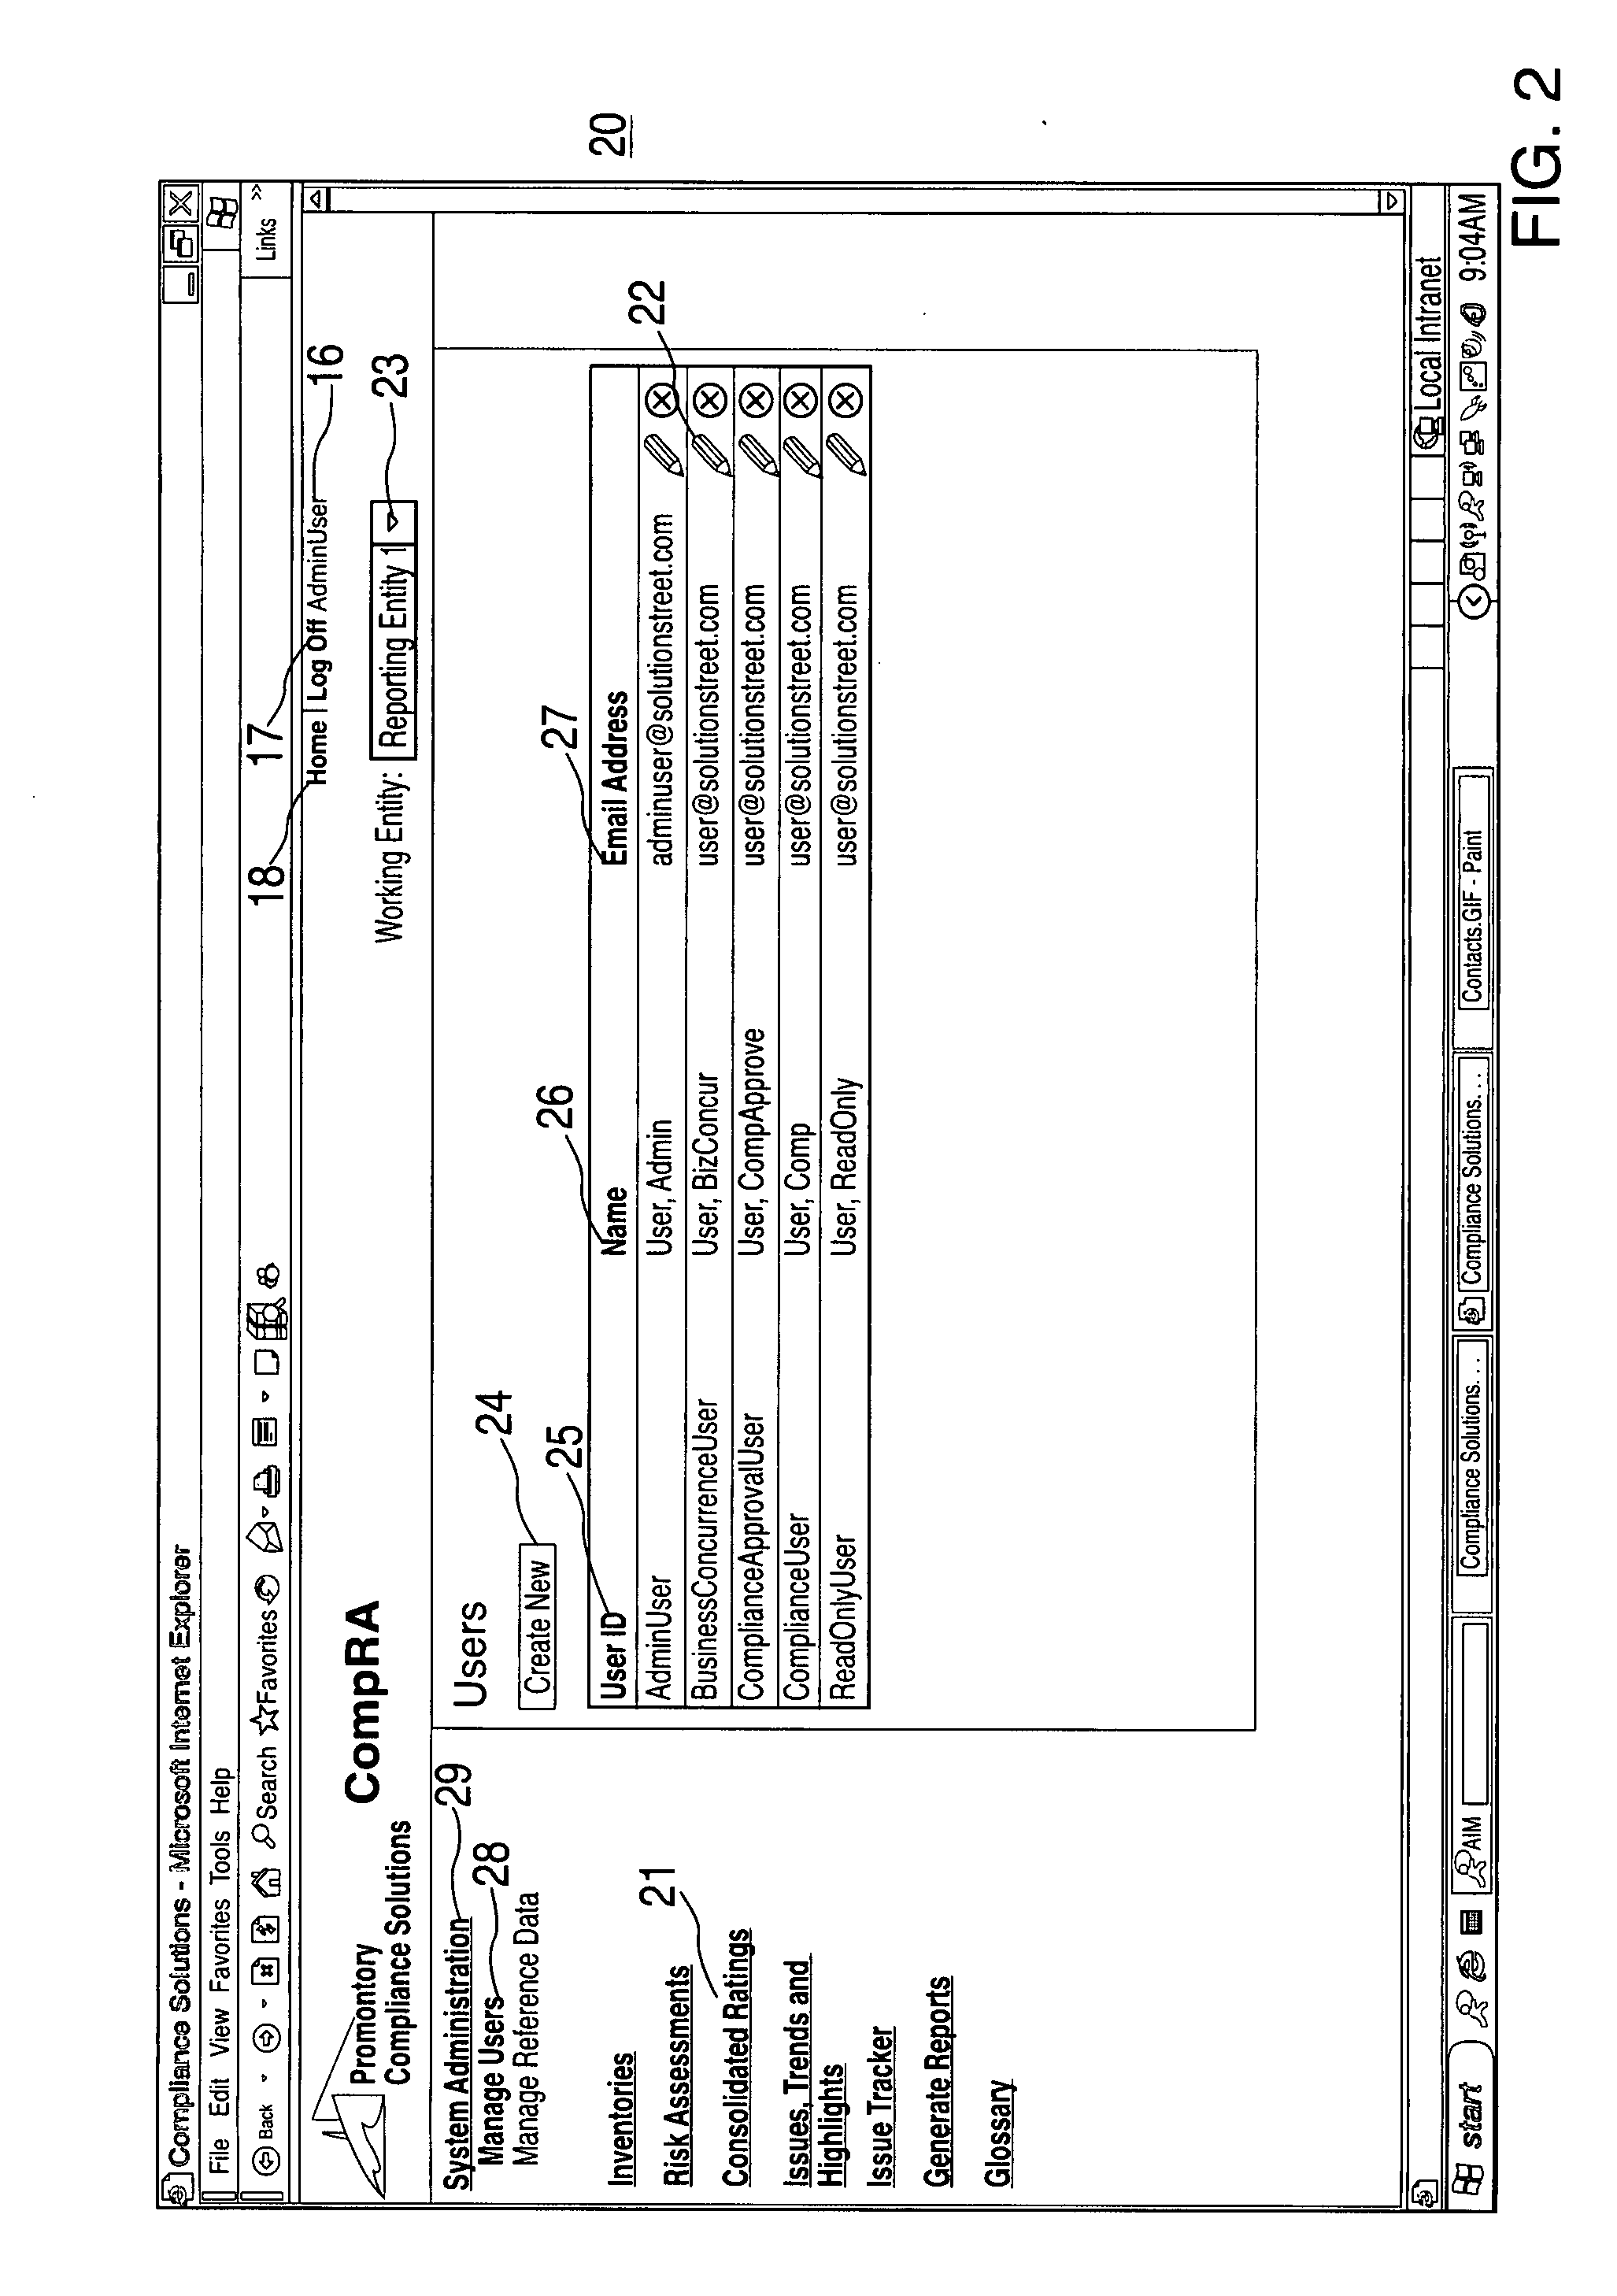 Method and apparatus for managing risk, such as compliance risk, in an organization